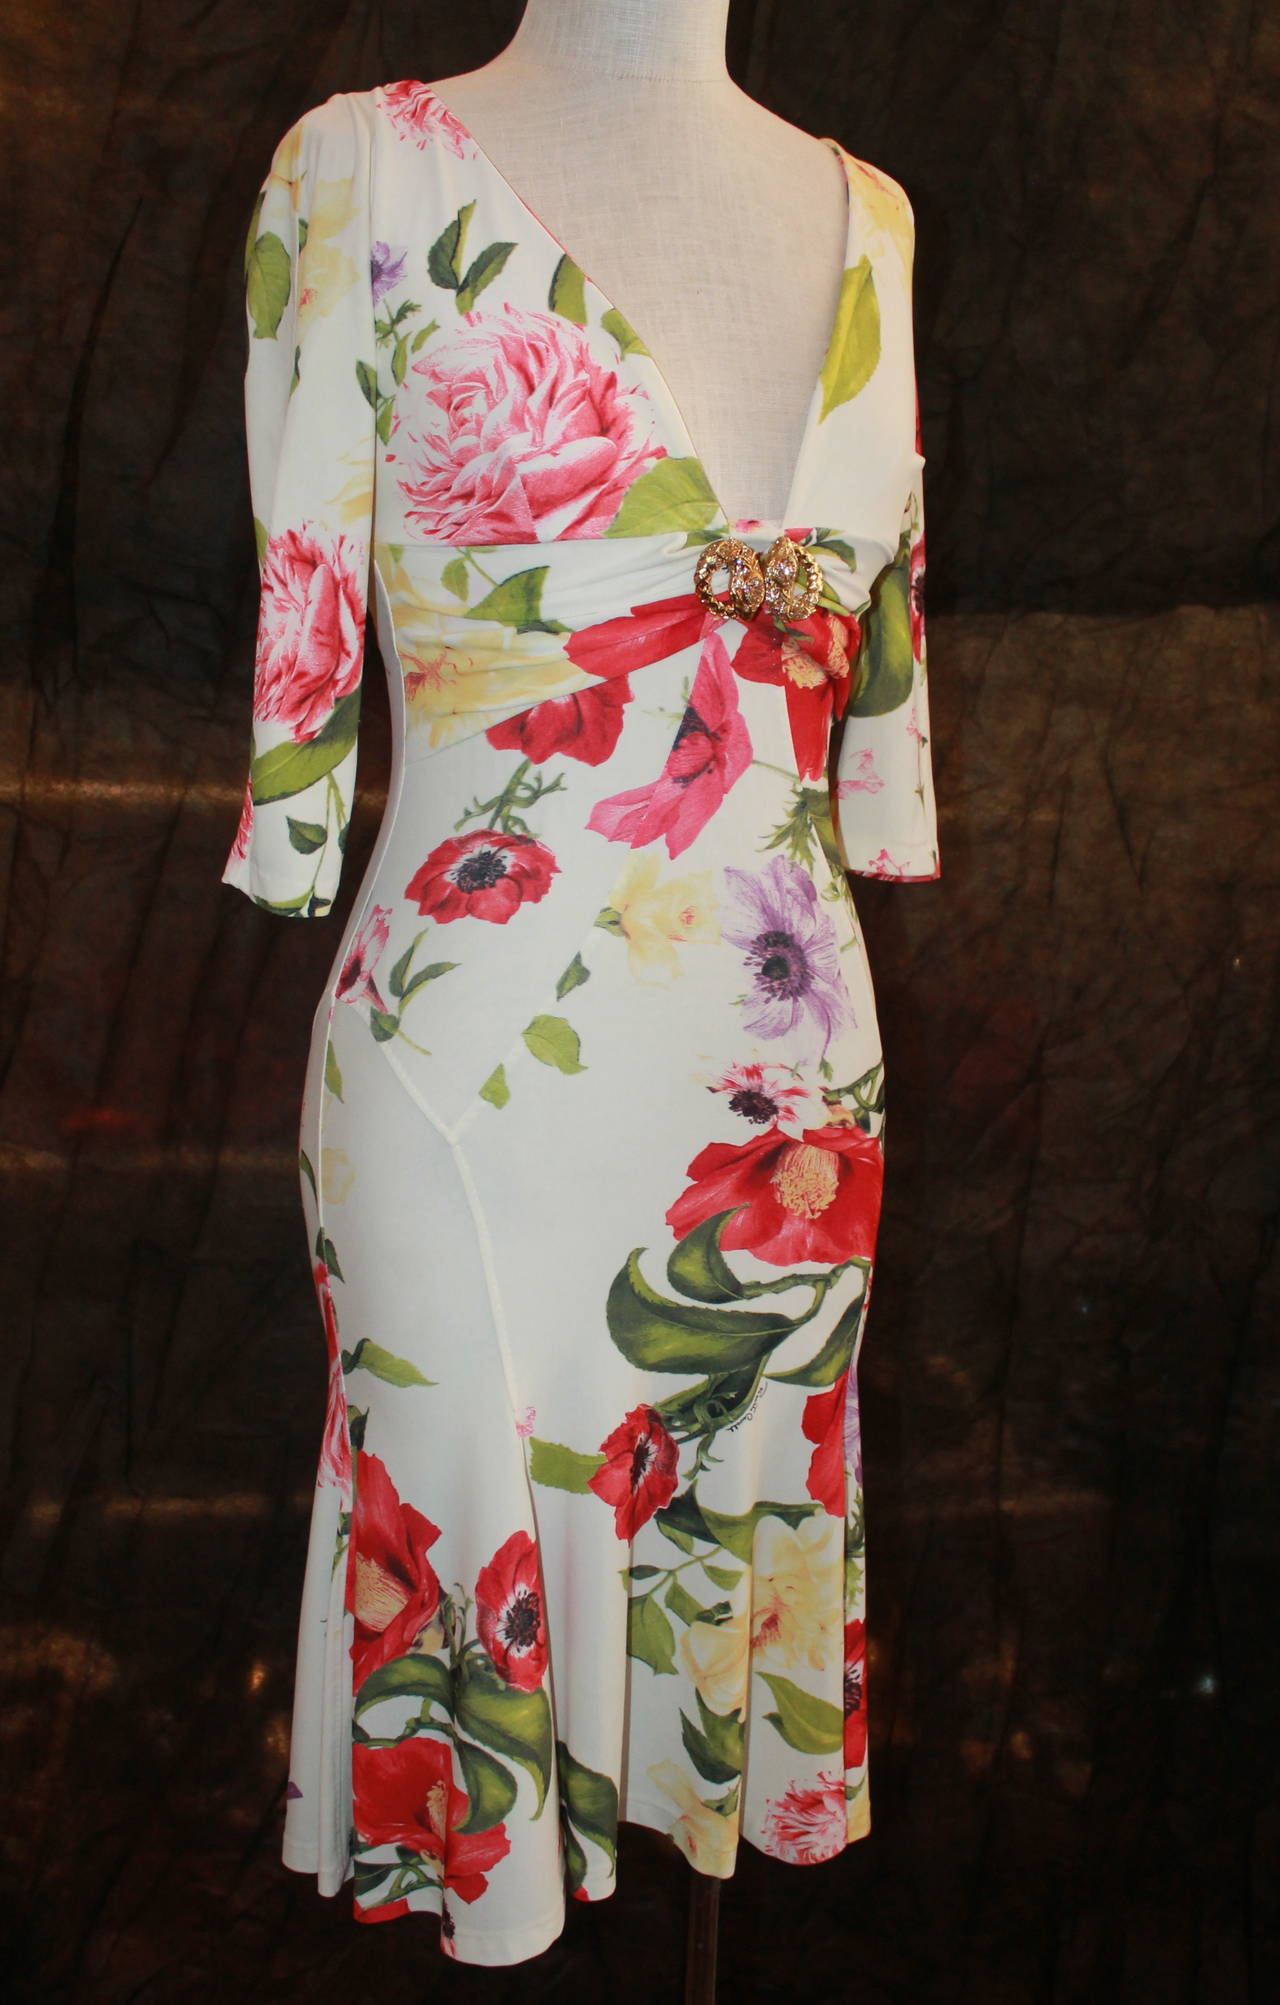 Roberto Cavalli White & Pink Floral Print Jersey 3/4 Sleeve Dress - 42 - retail $4,225. This dress is in excellent condition with no visible signs of wear. An Italian 42 is closer to an American size 8. 

Measurements:
Buts- 32